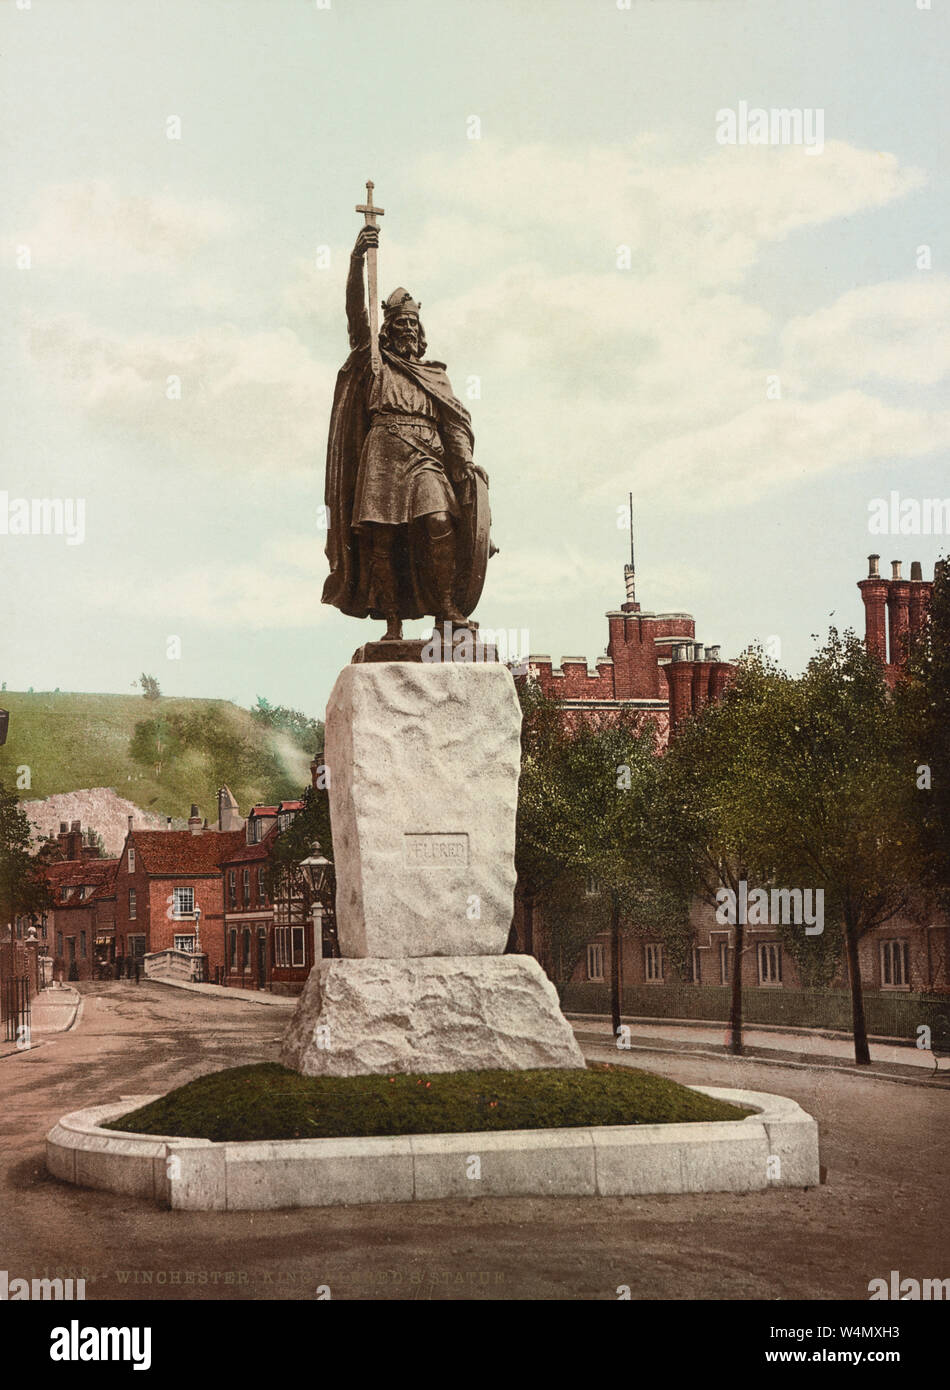 King Alfred's Statue (Alfred der Große) in Winchester, England. 1901. Stockfoto